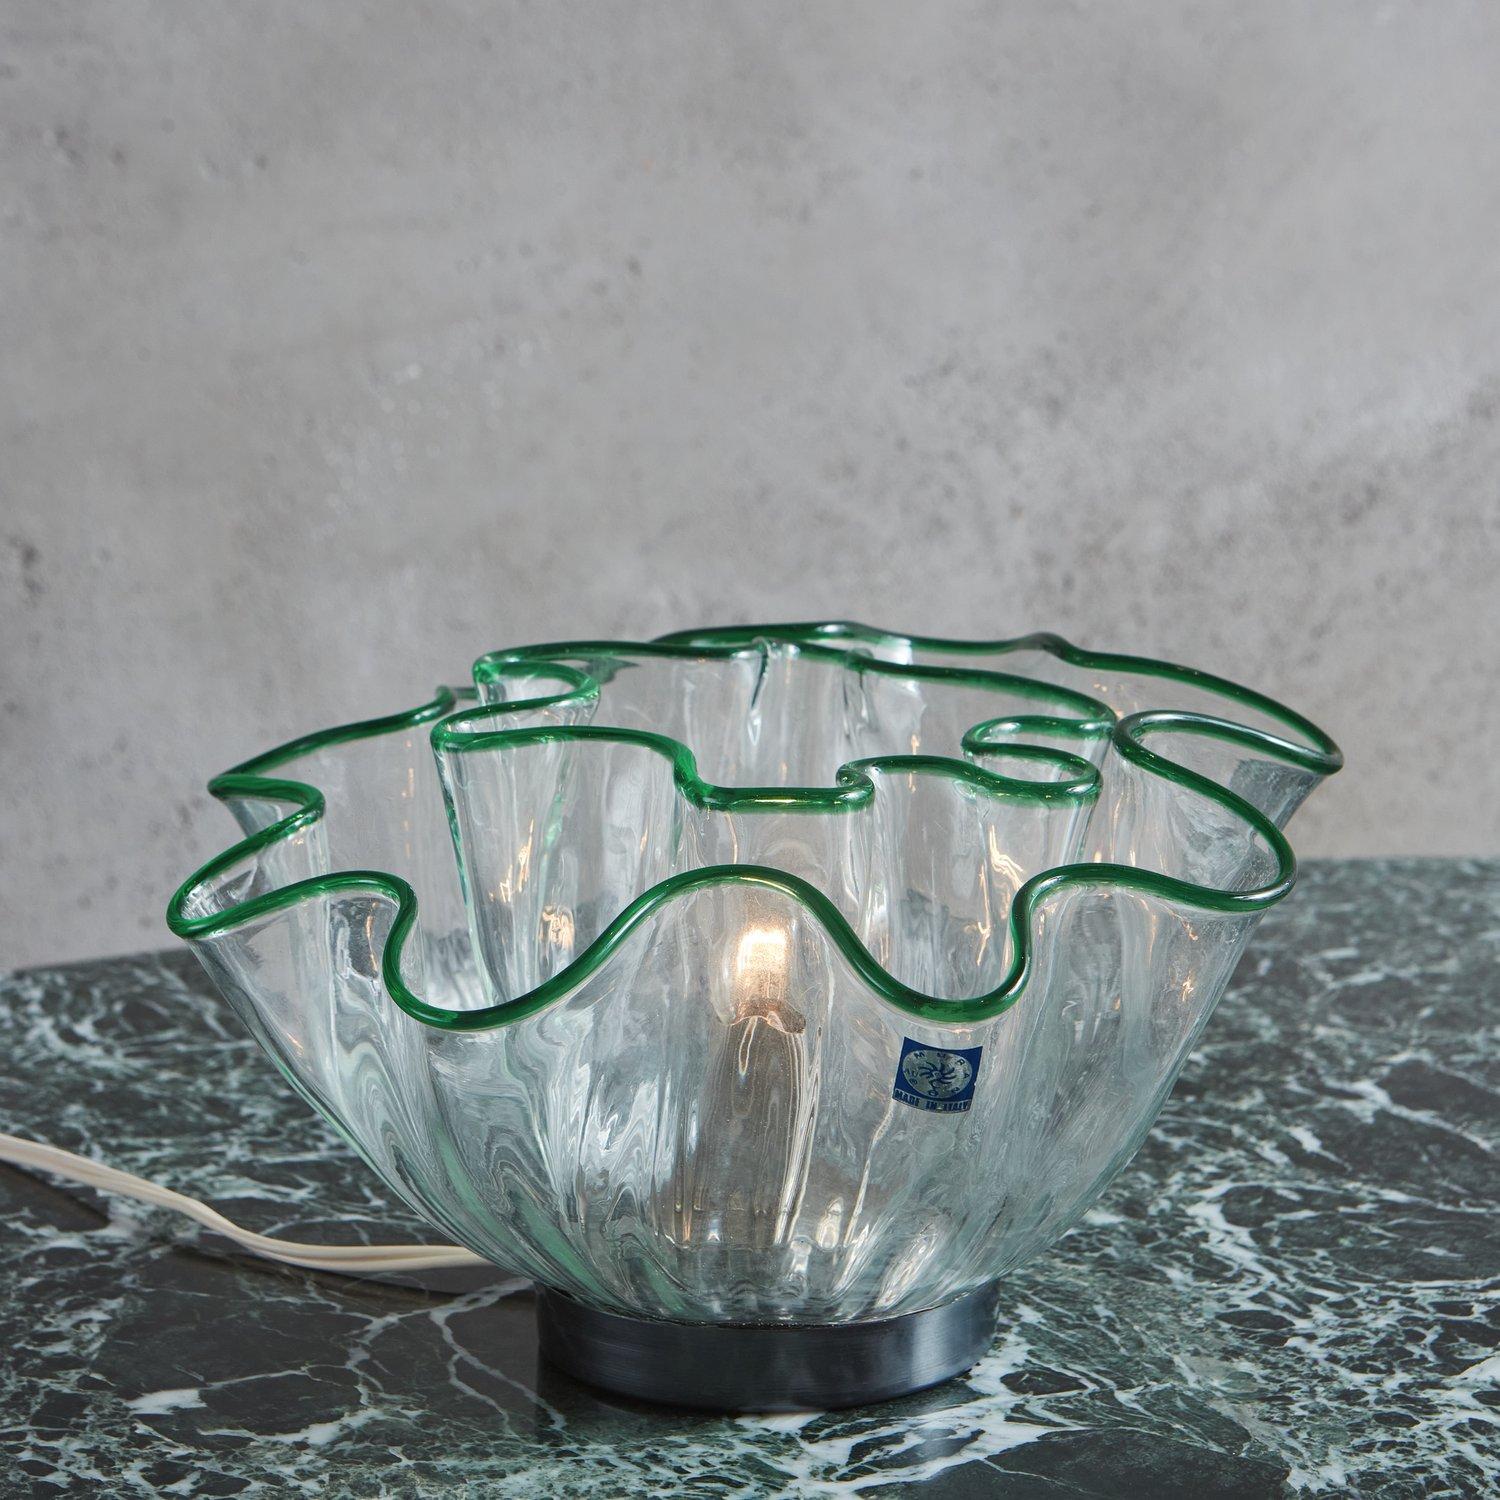 A collection of Italian Galea lamps designed by Adalberto Dal Lago for Vistosi in 1968. These hand blown Murano glass lamps feature nesting fazzoletto shades with a green trim. When lit, they emit a beautiful sunburst light effect. They can hang as